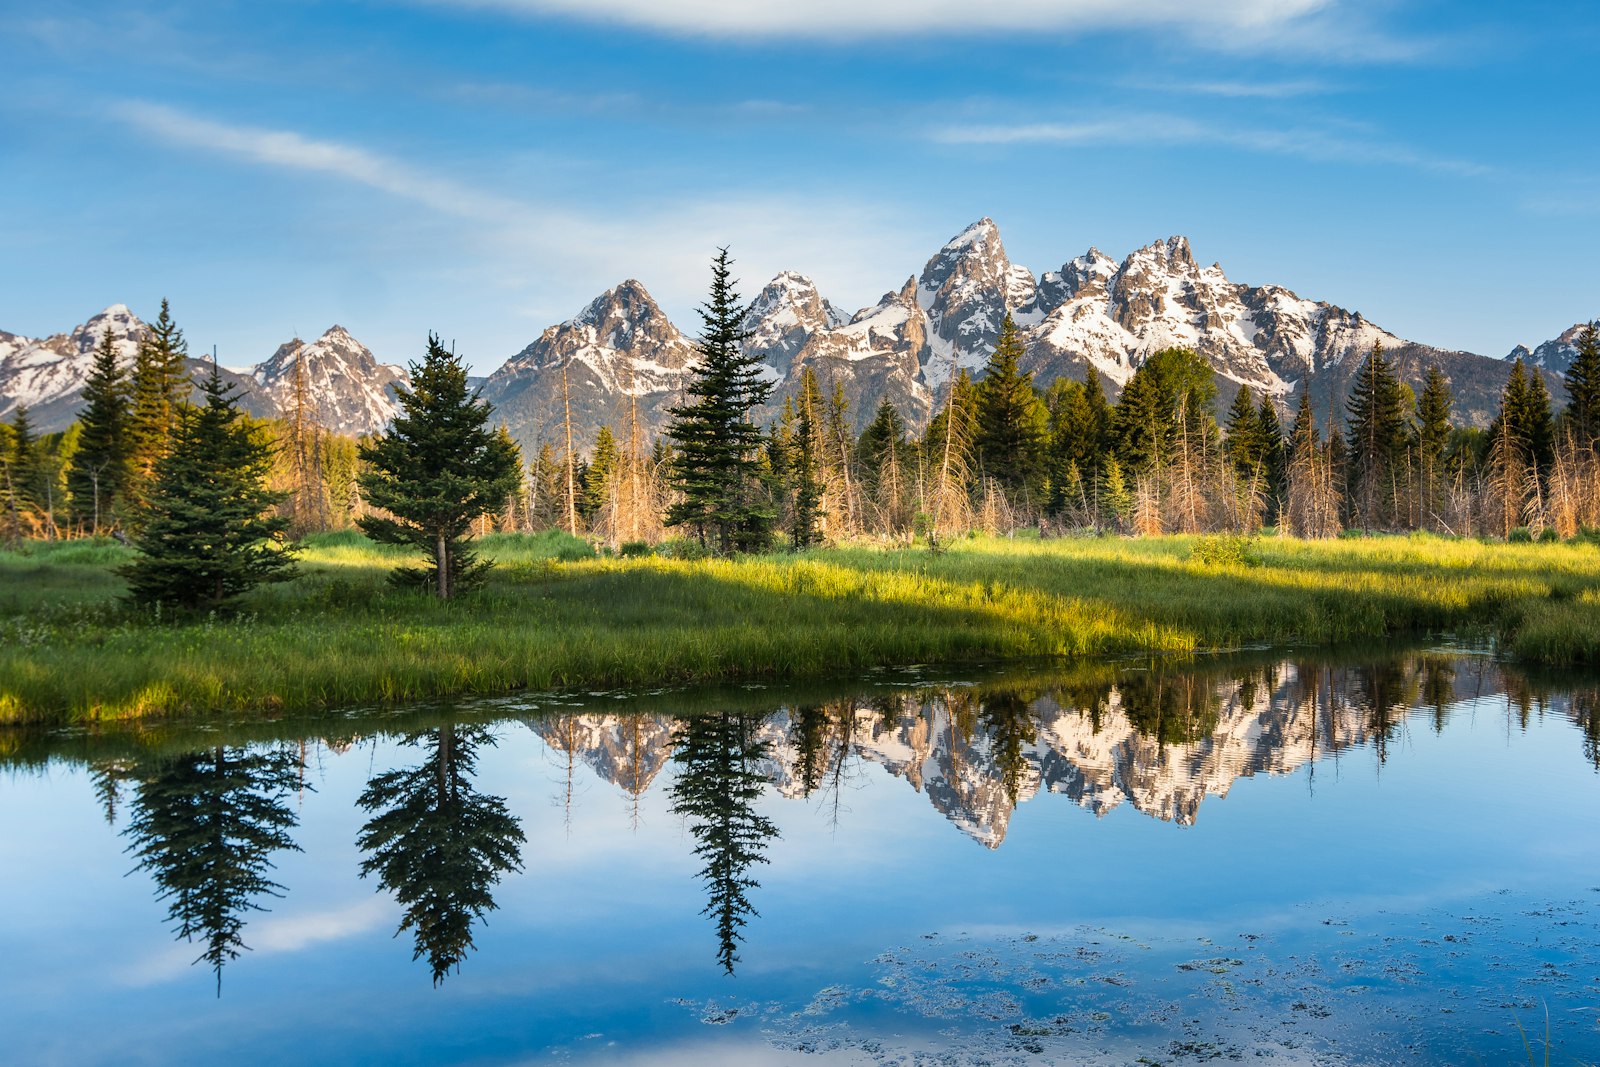 A clear lake reflects back evergreen trees and a snow-capped mountain landscape